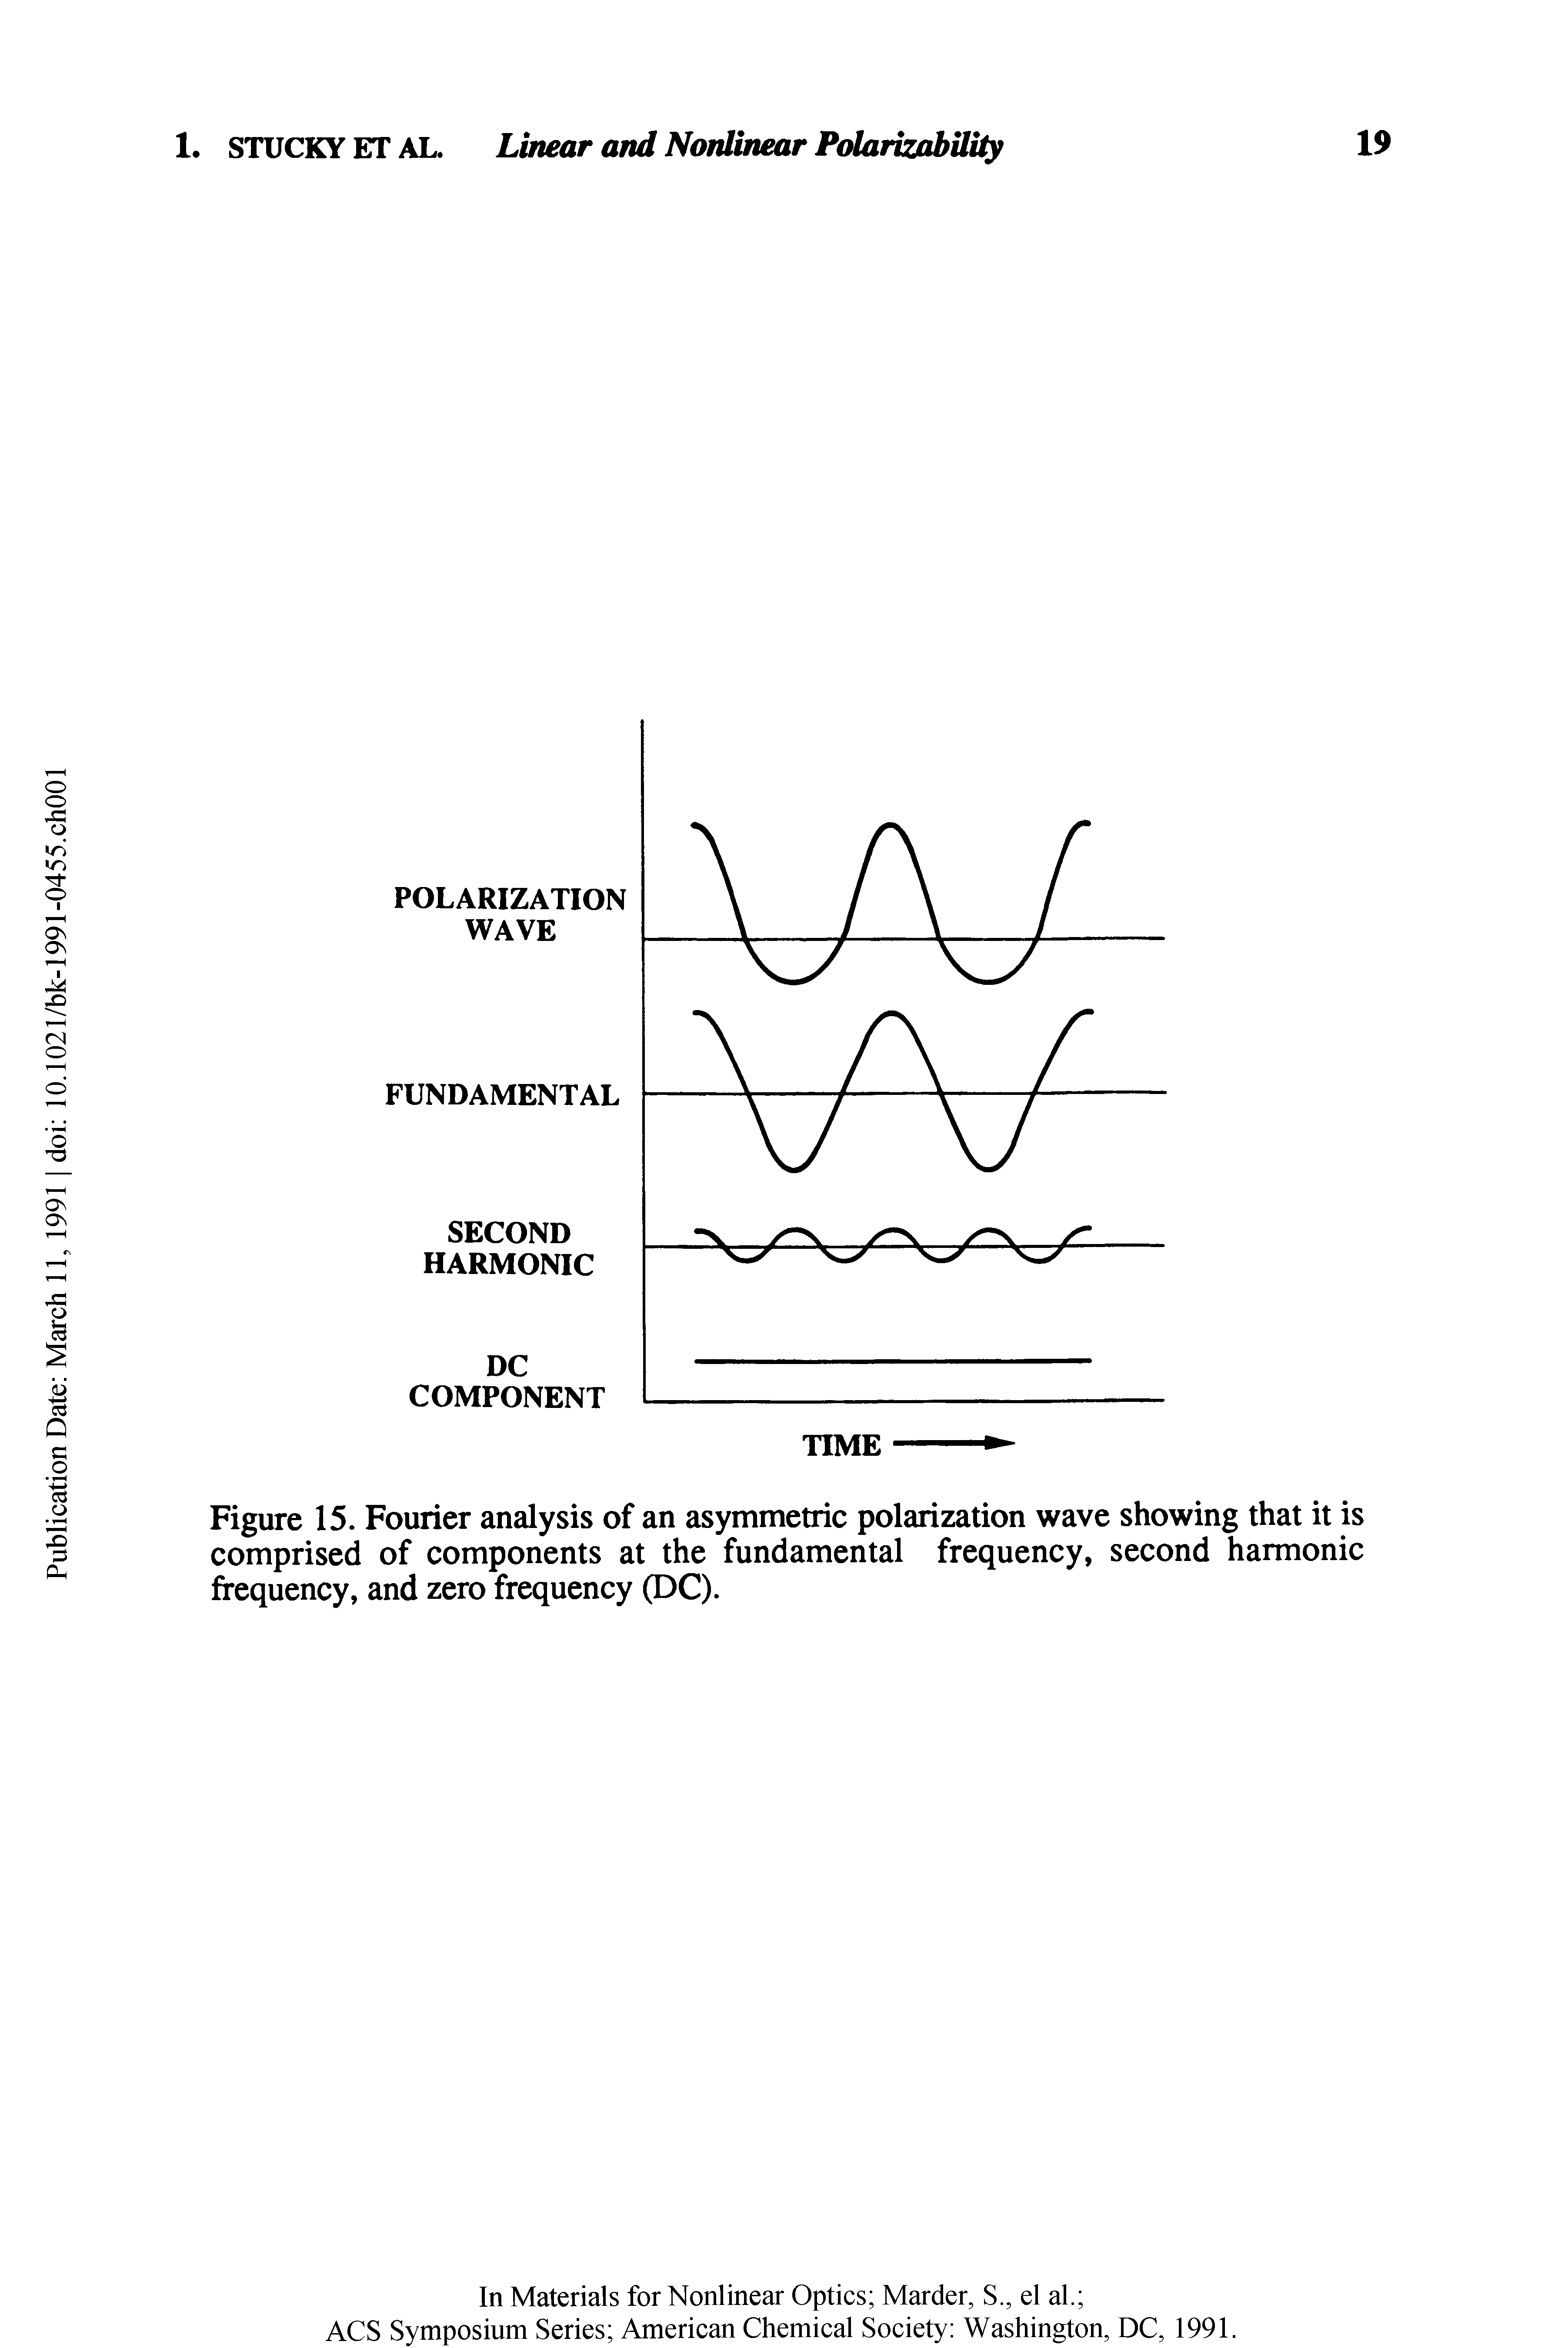 Figure 15. Fourier analysis of an asymmetric polarization wave showing that it is comprised of components at the fundamental frequency, second harmonic frequency, and zero frequency (DC).